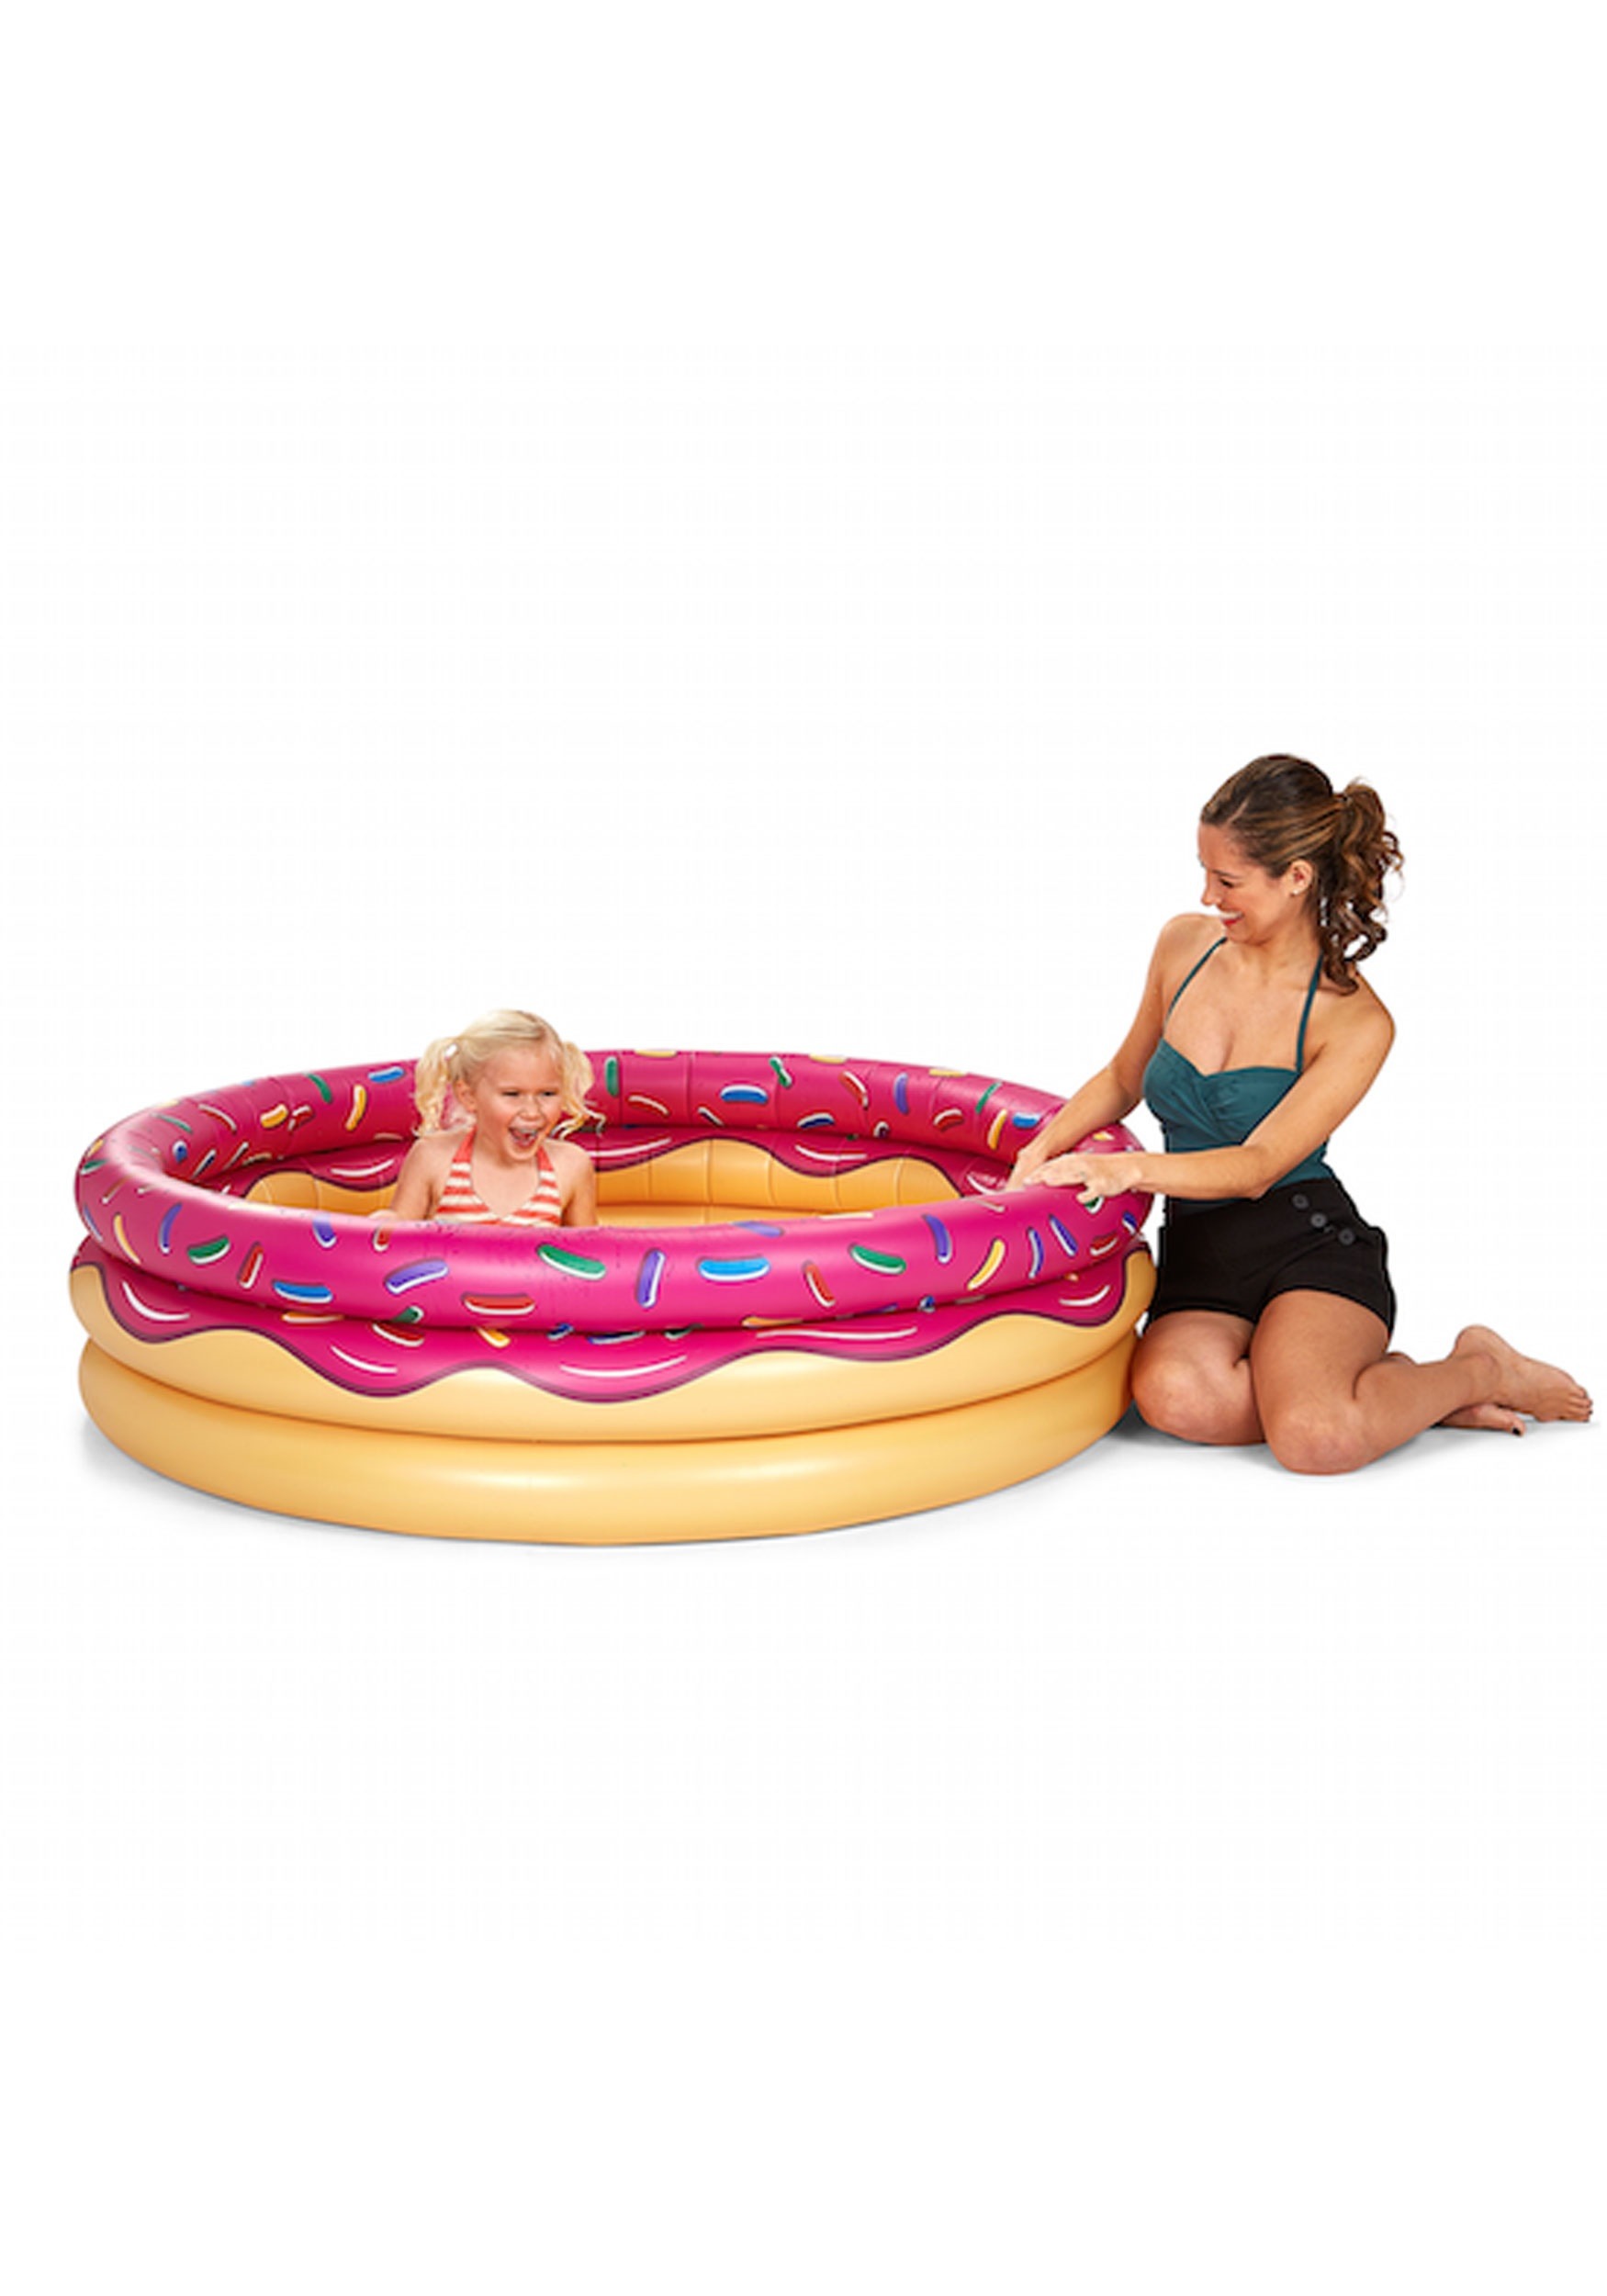 Donut Childrens Inflatable Pool